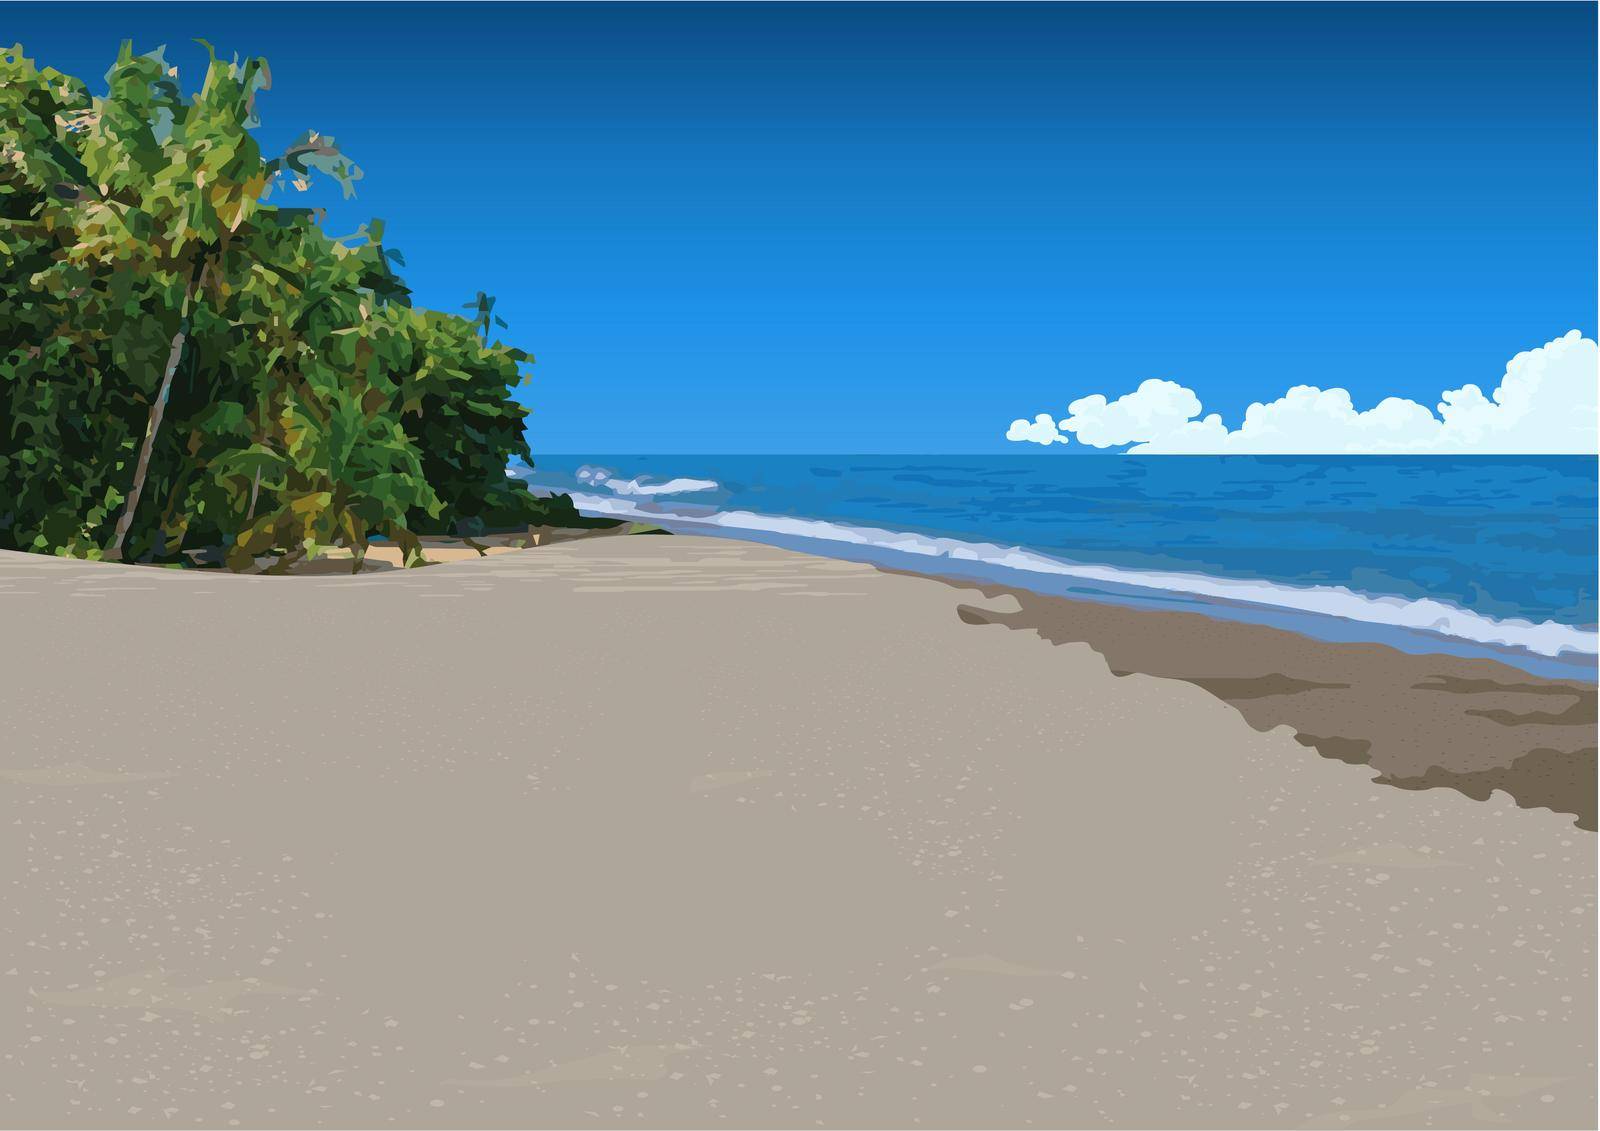 Sandy Tropical Beach and Sea in the Background by illustratorCZ